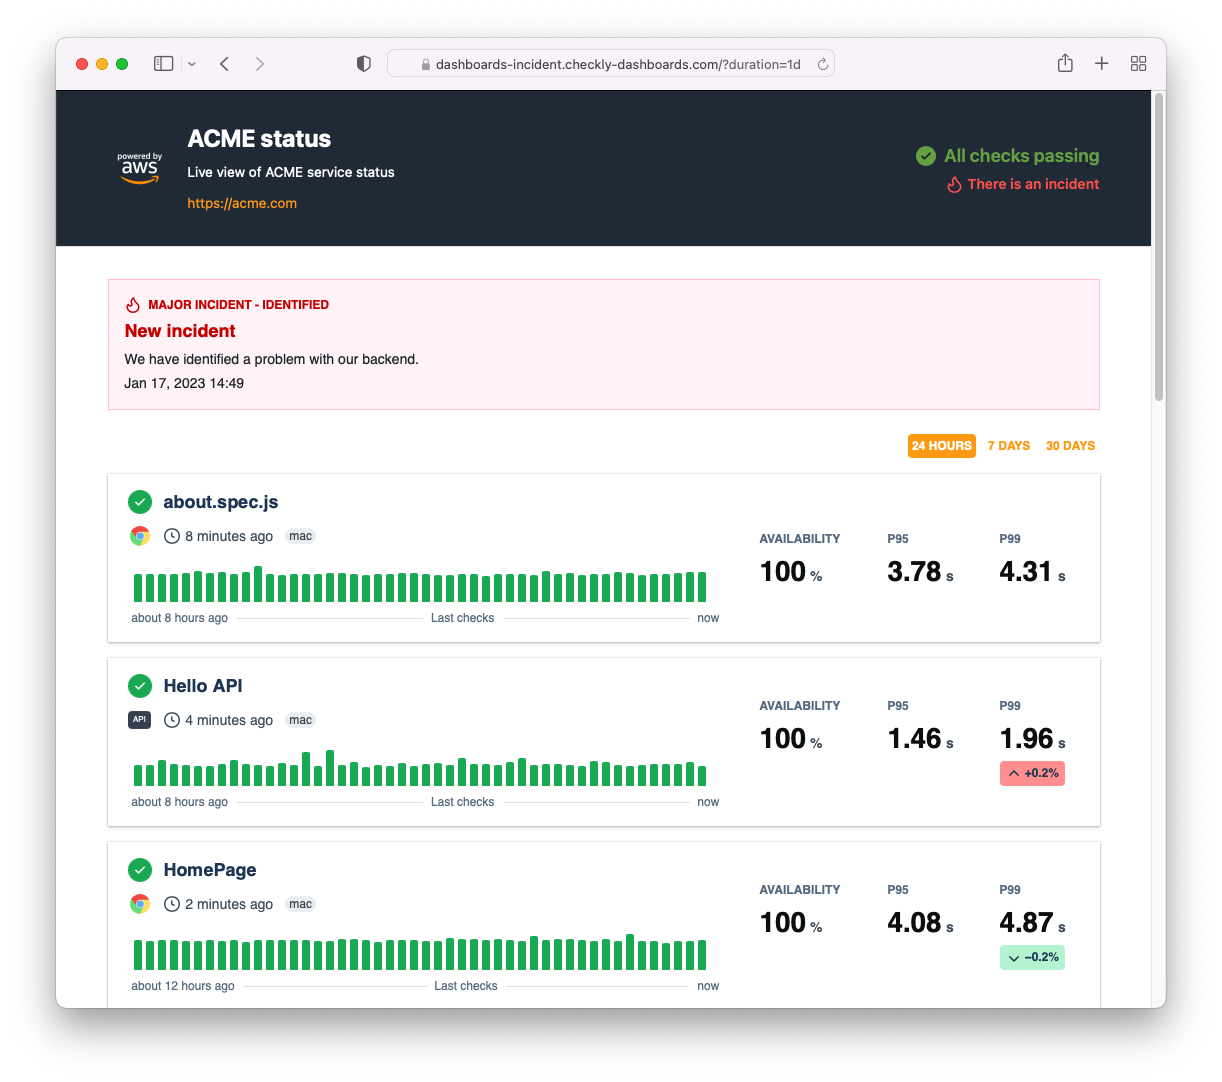 Dashboard with custom style to match AWS